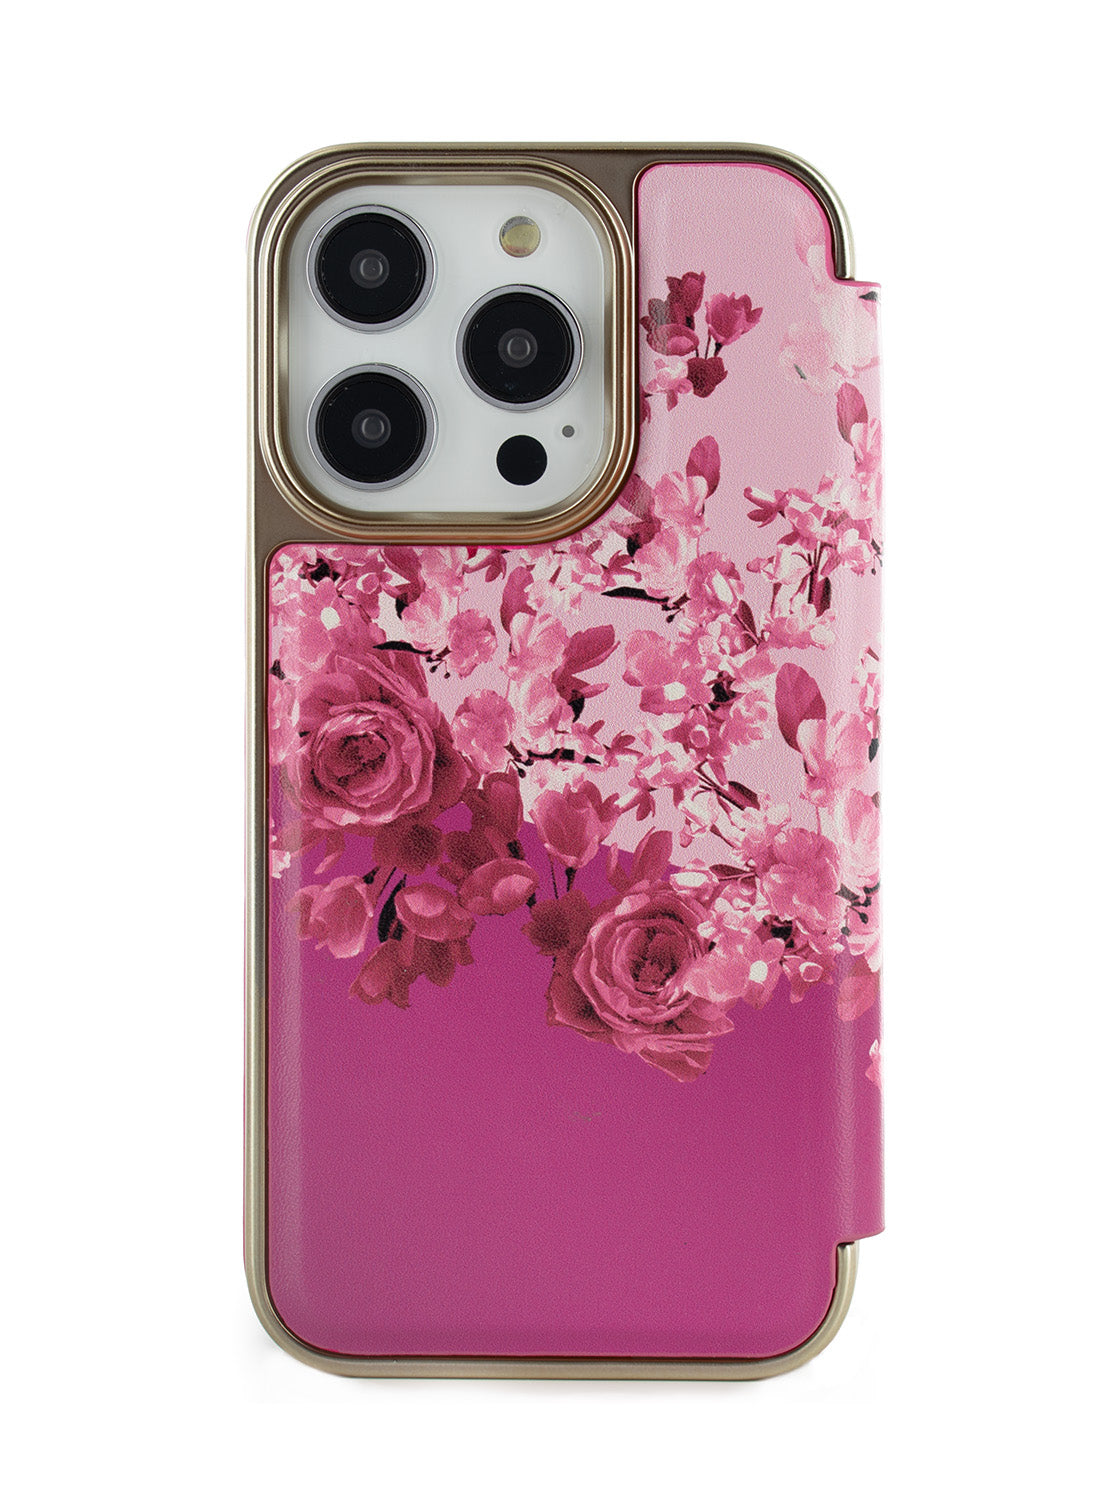 Ted Baker ALSTA Pink Scattered Flowers Mirror Folio Phone Case for iPhone 14 Pro Max Gold Shell